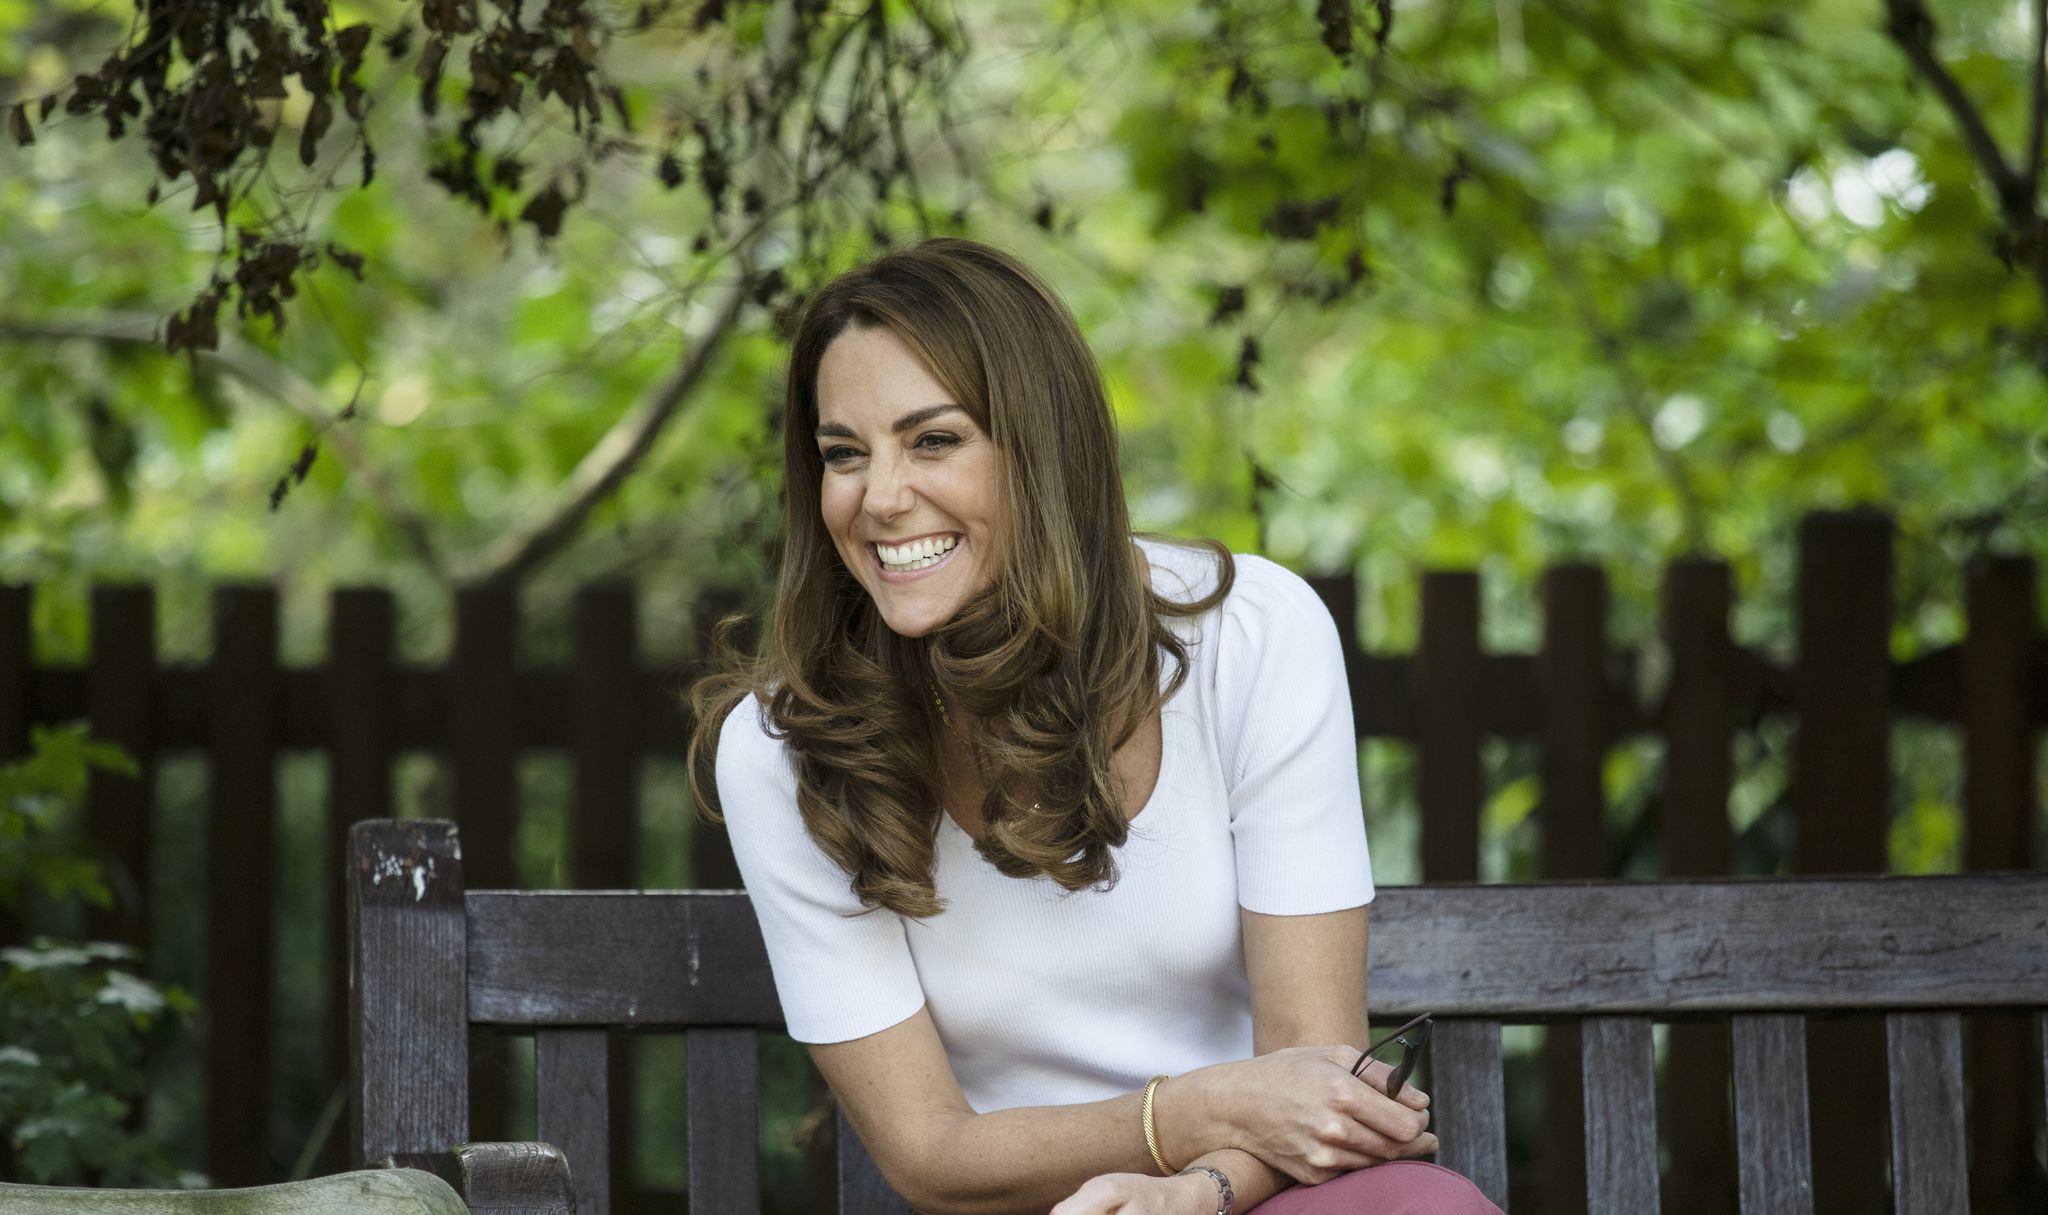 the duchess of cambridge spending the day learning about the importance of parent powered initiatives, hearing from families and key organisations about the ways in which peer support can help boost parent wellbeing here, her royal highness in battersea park listening directly to parents about their experiences of parent to parent support22 september 2020jack hillthe timesrota